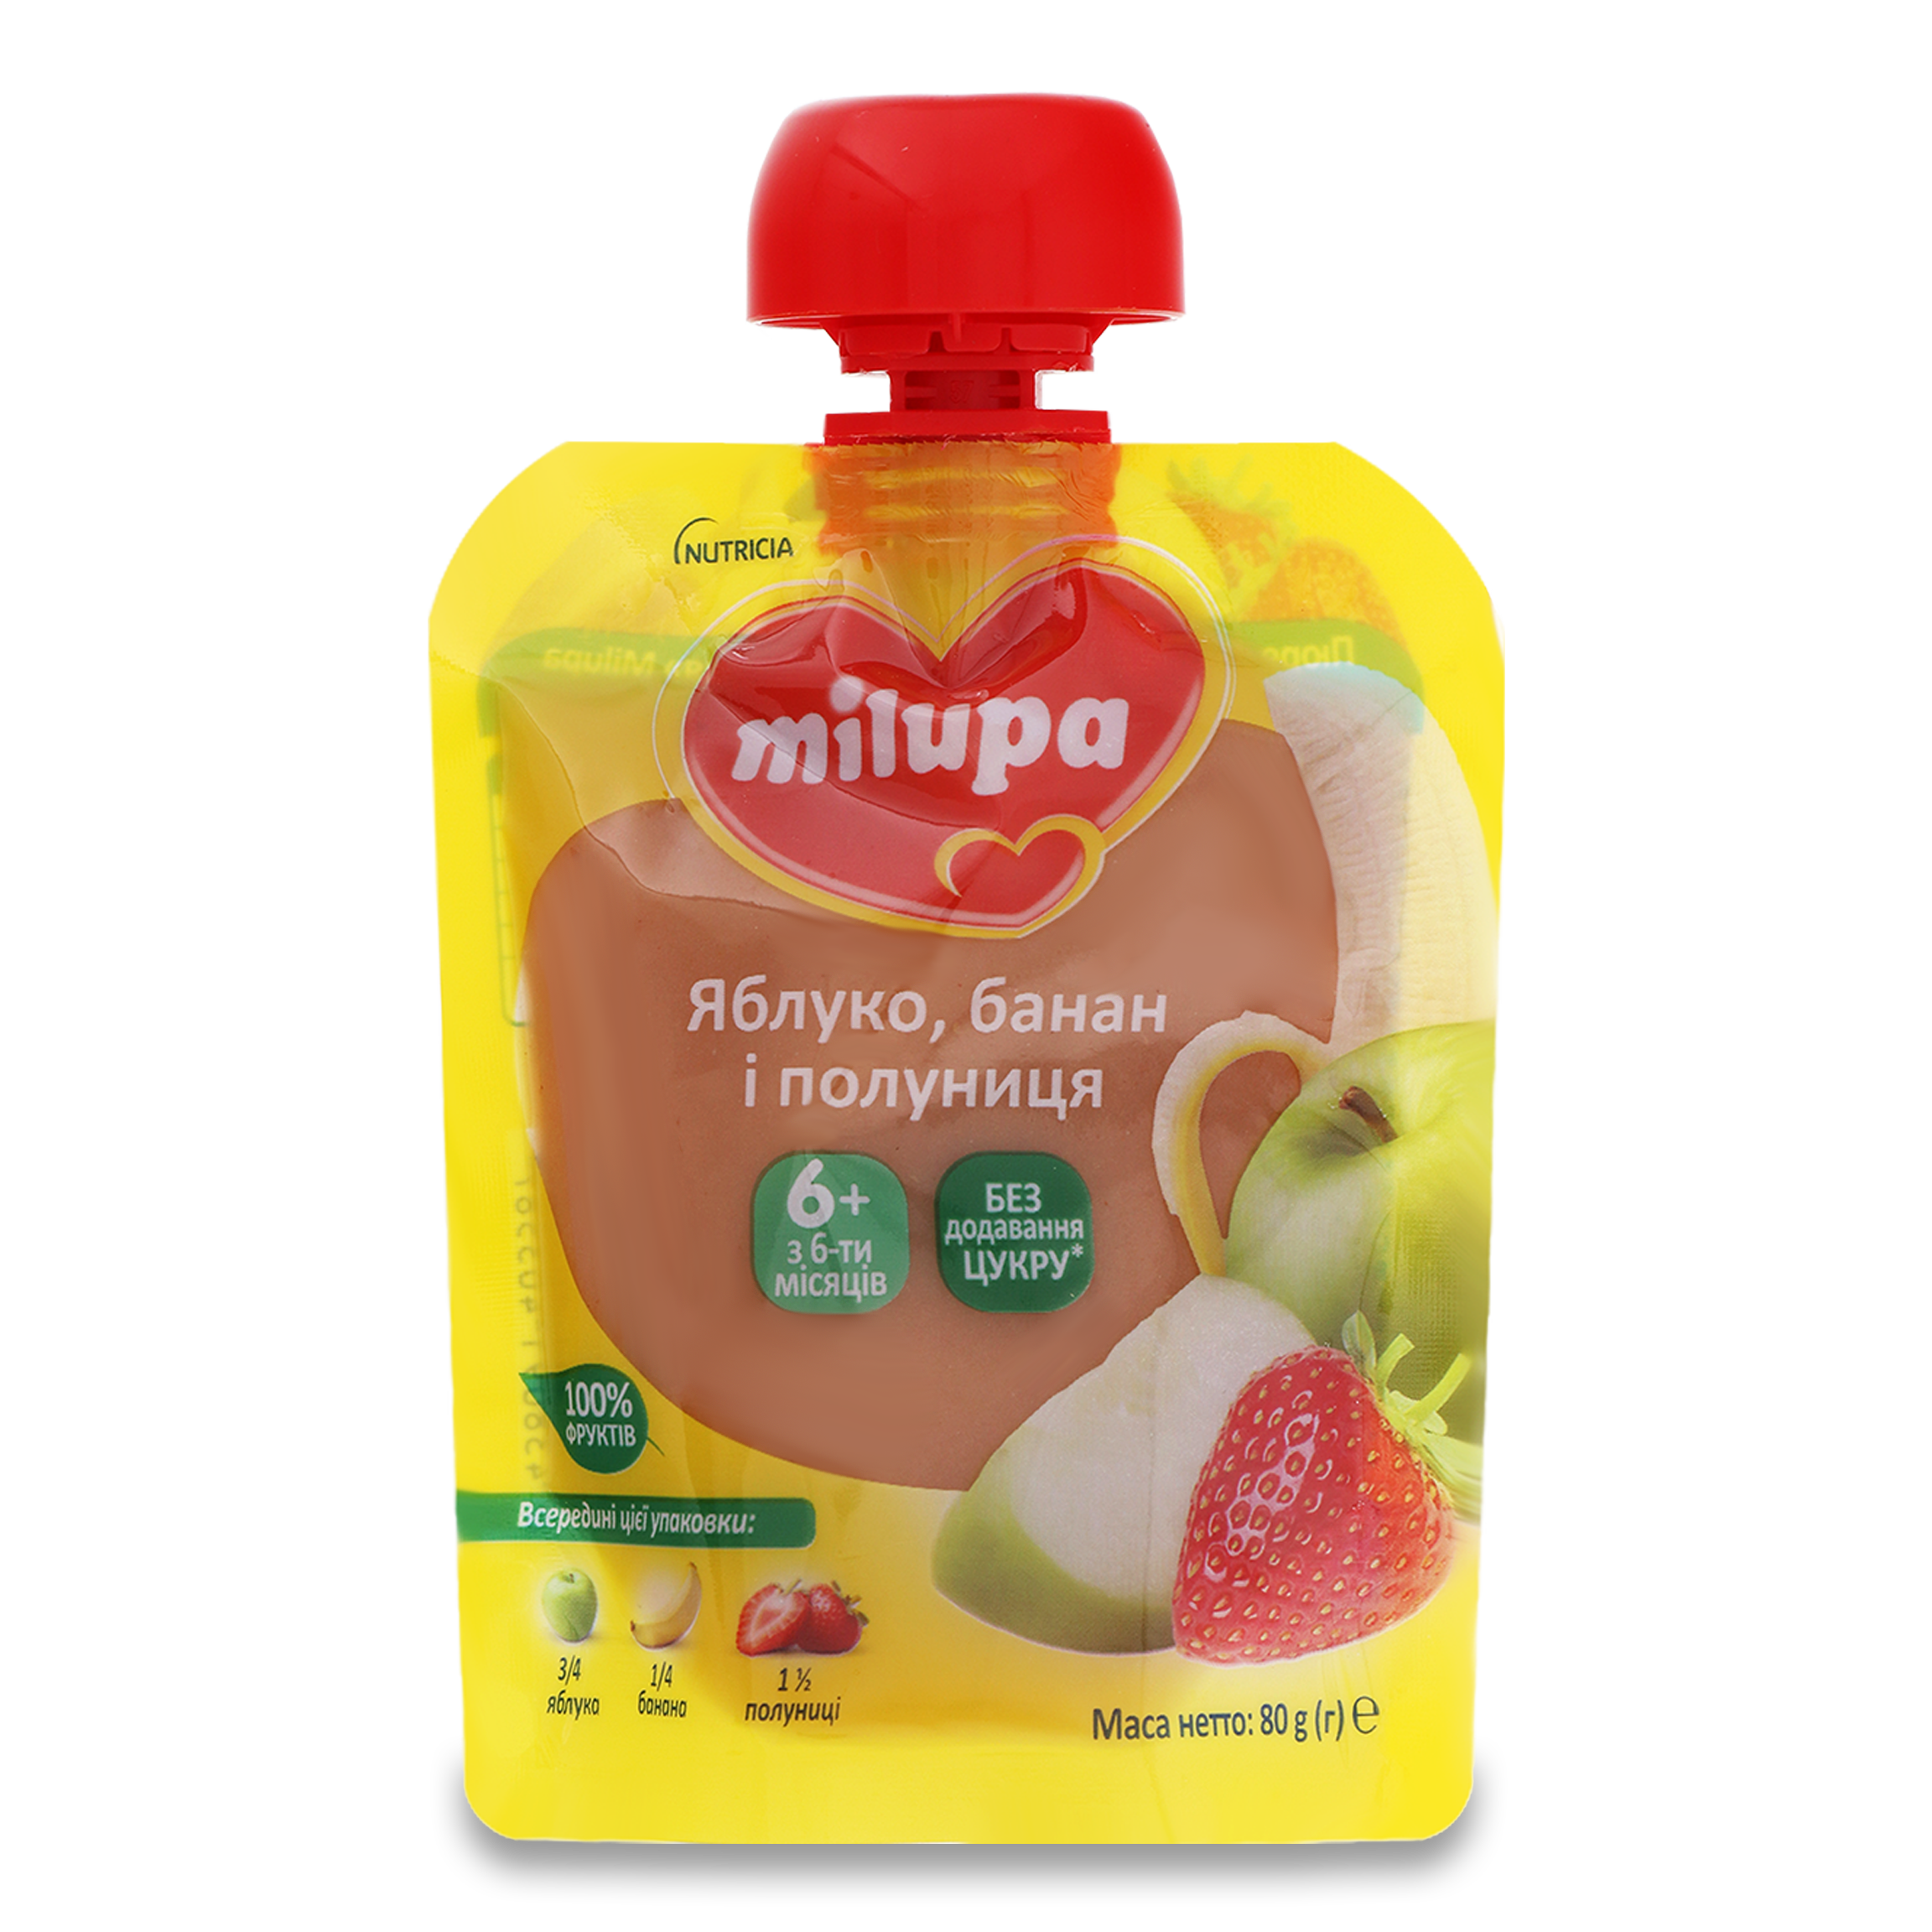 Milupa for children from 6 months apple-banana-strawberry puree 80g